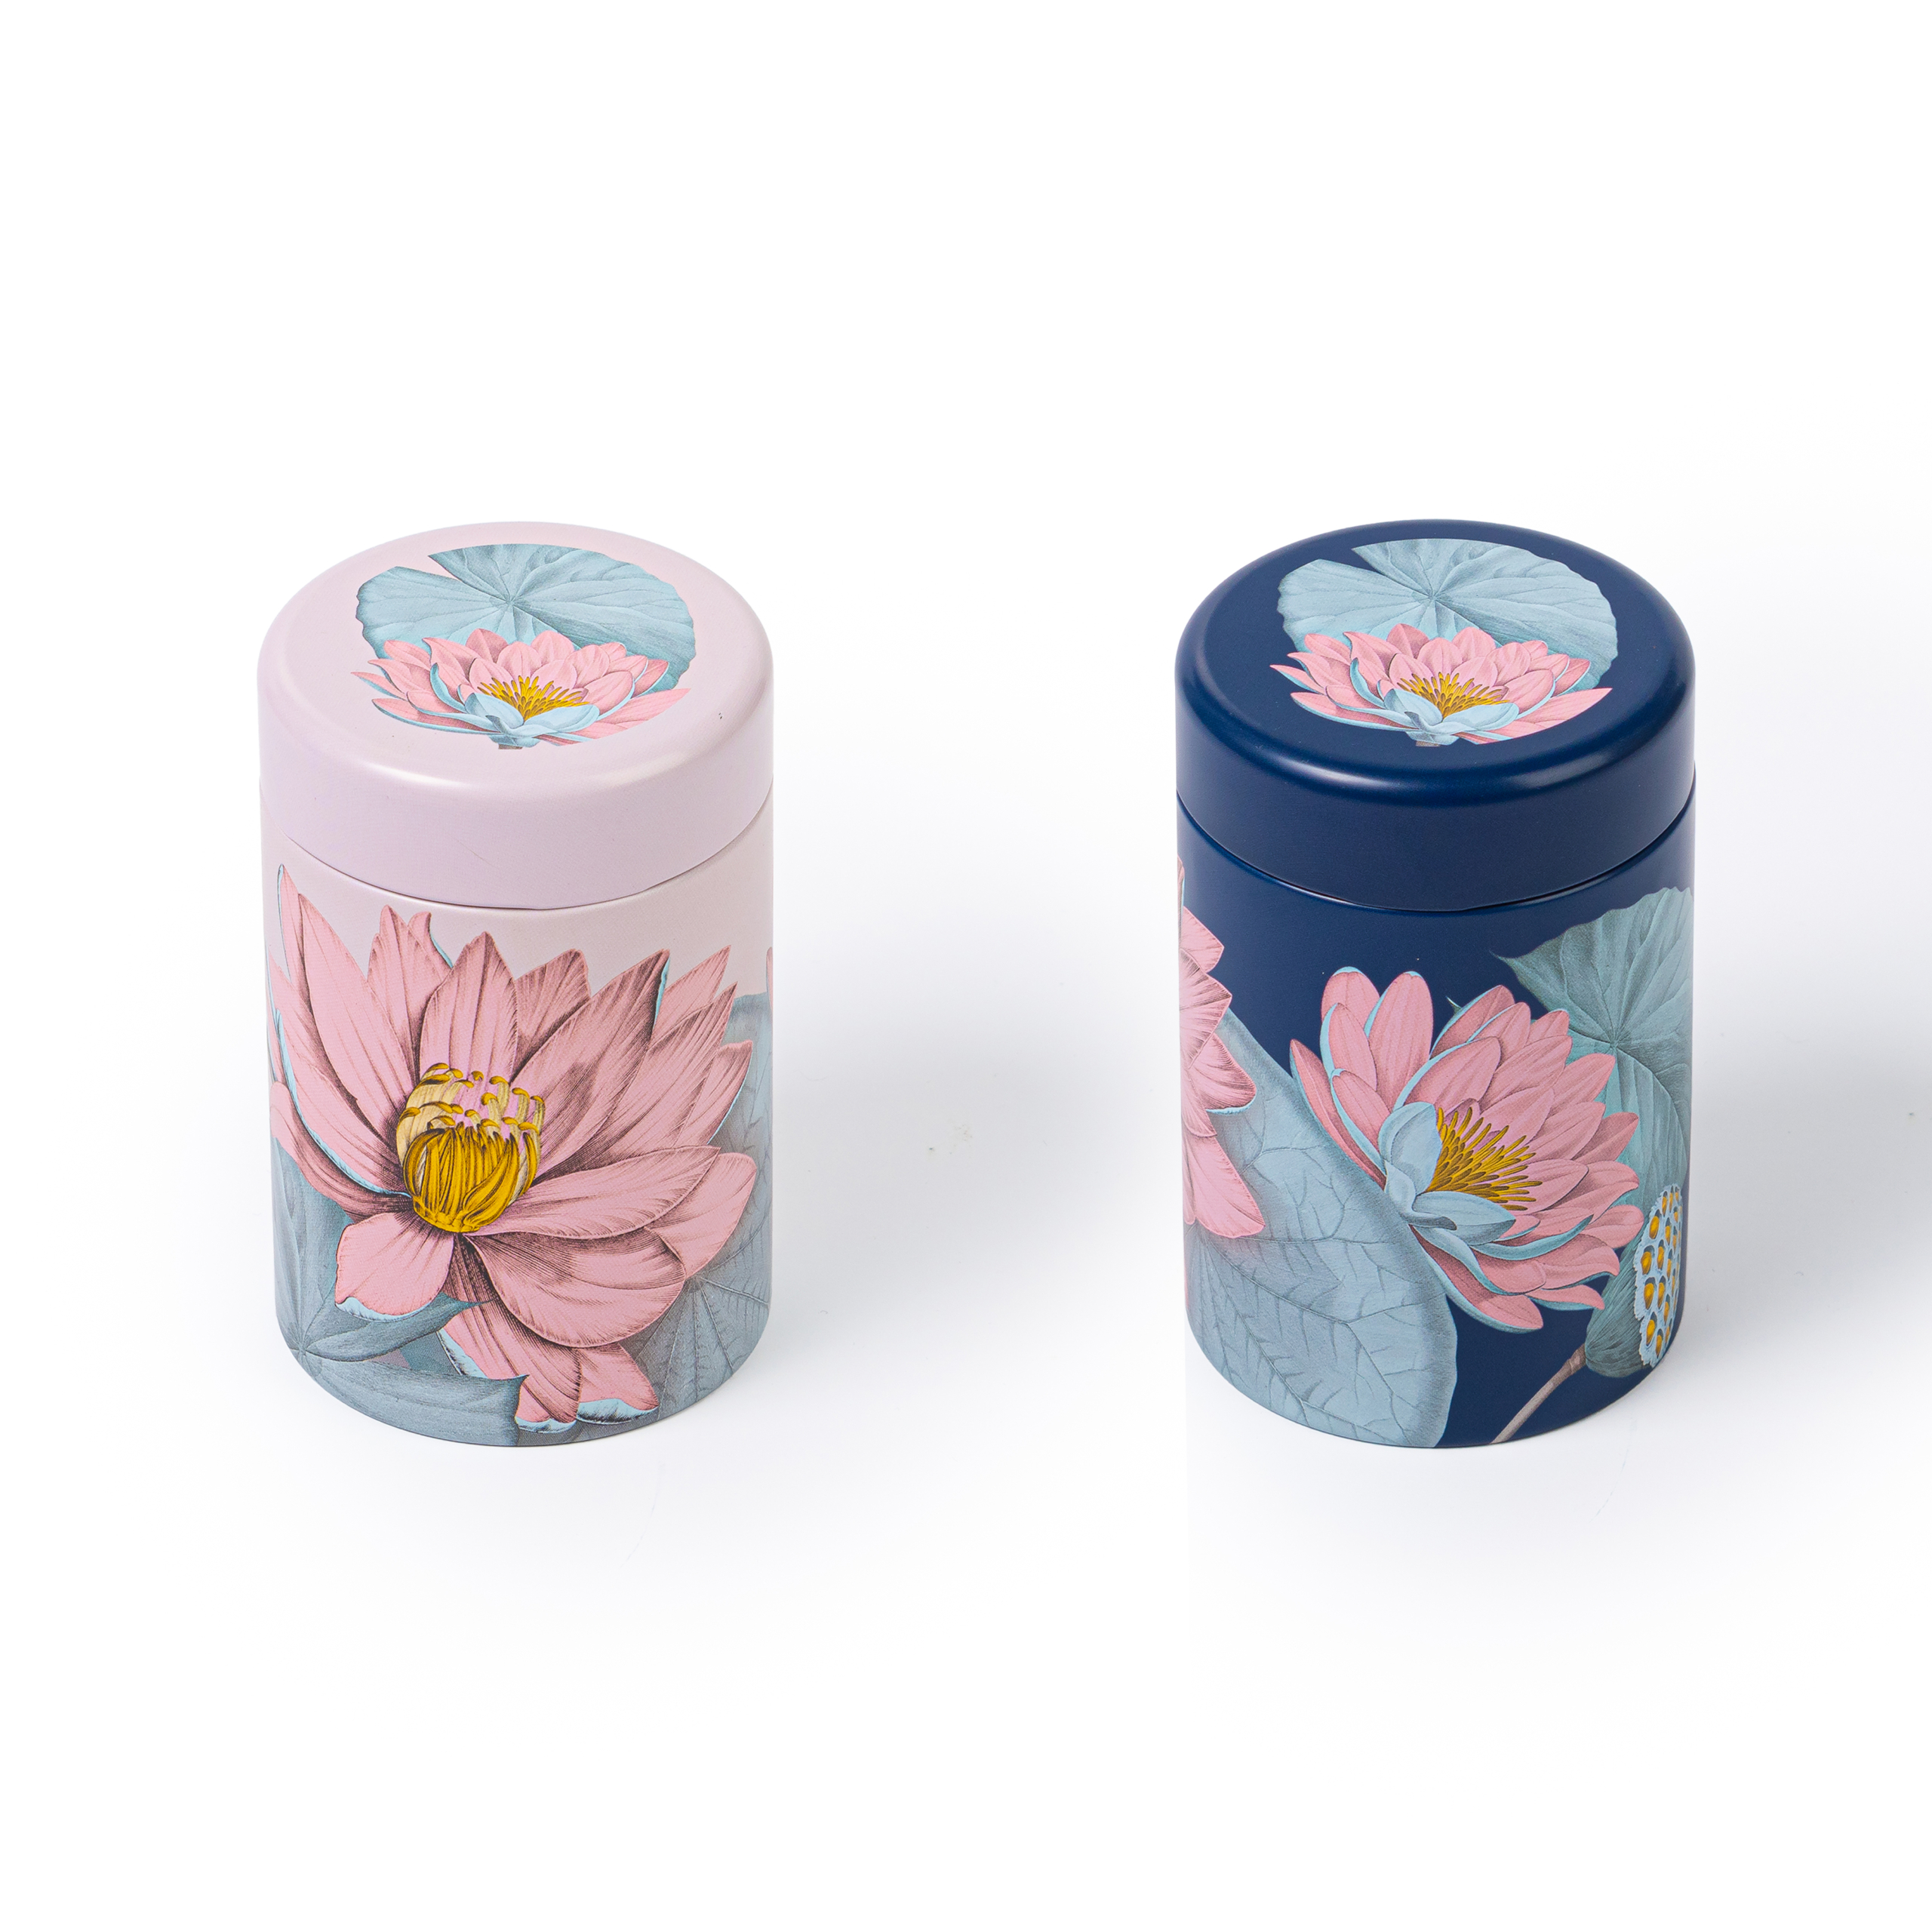 Water Lily Caddy